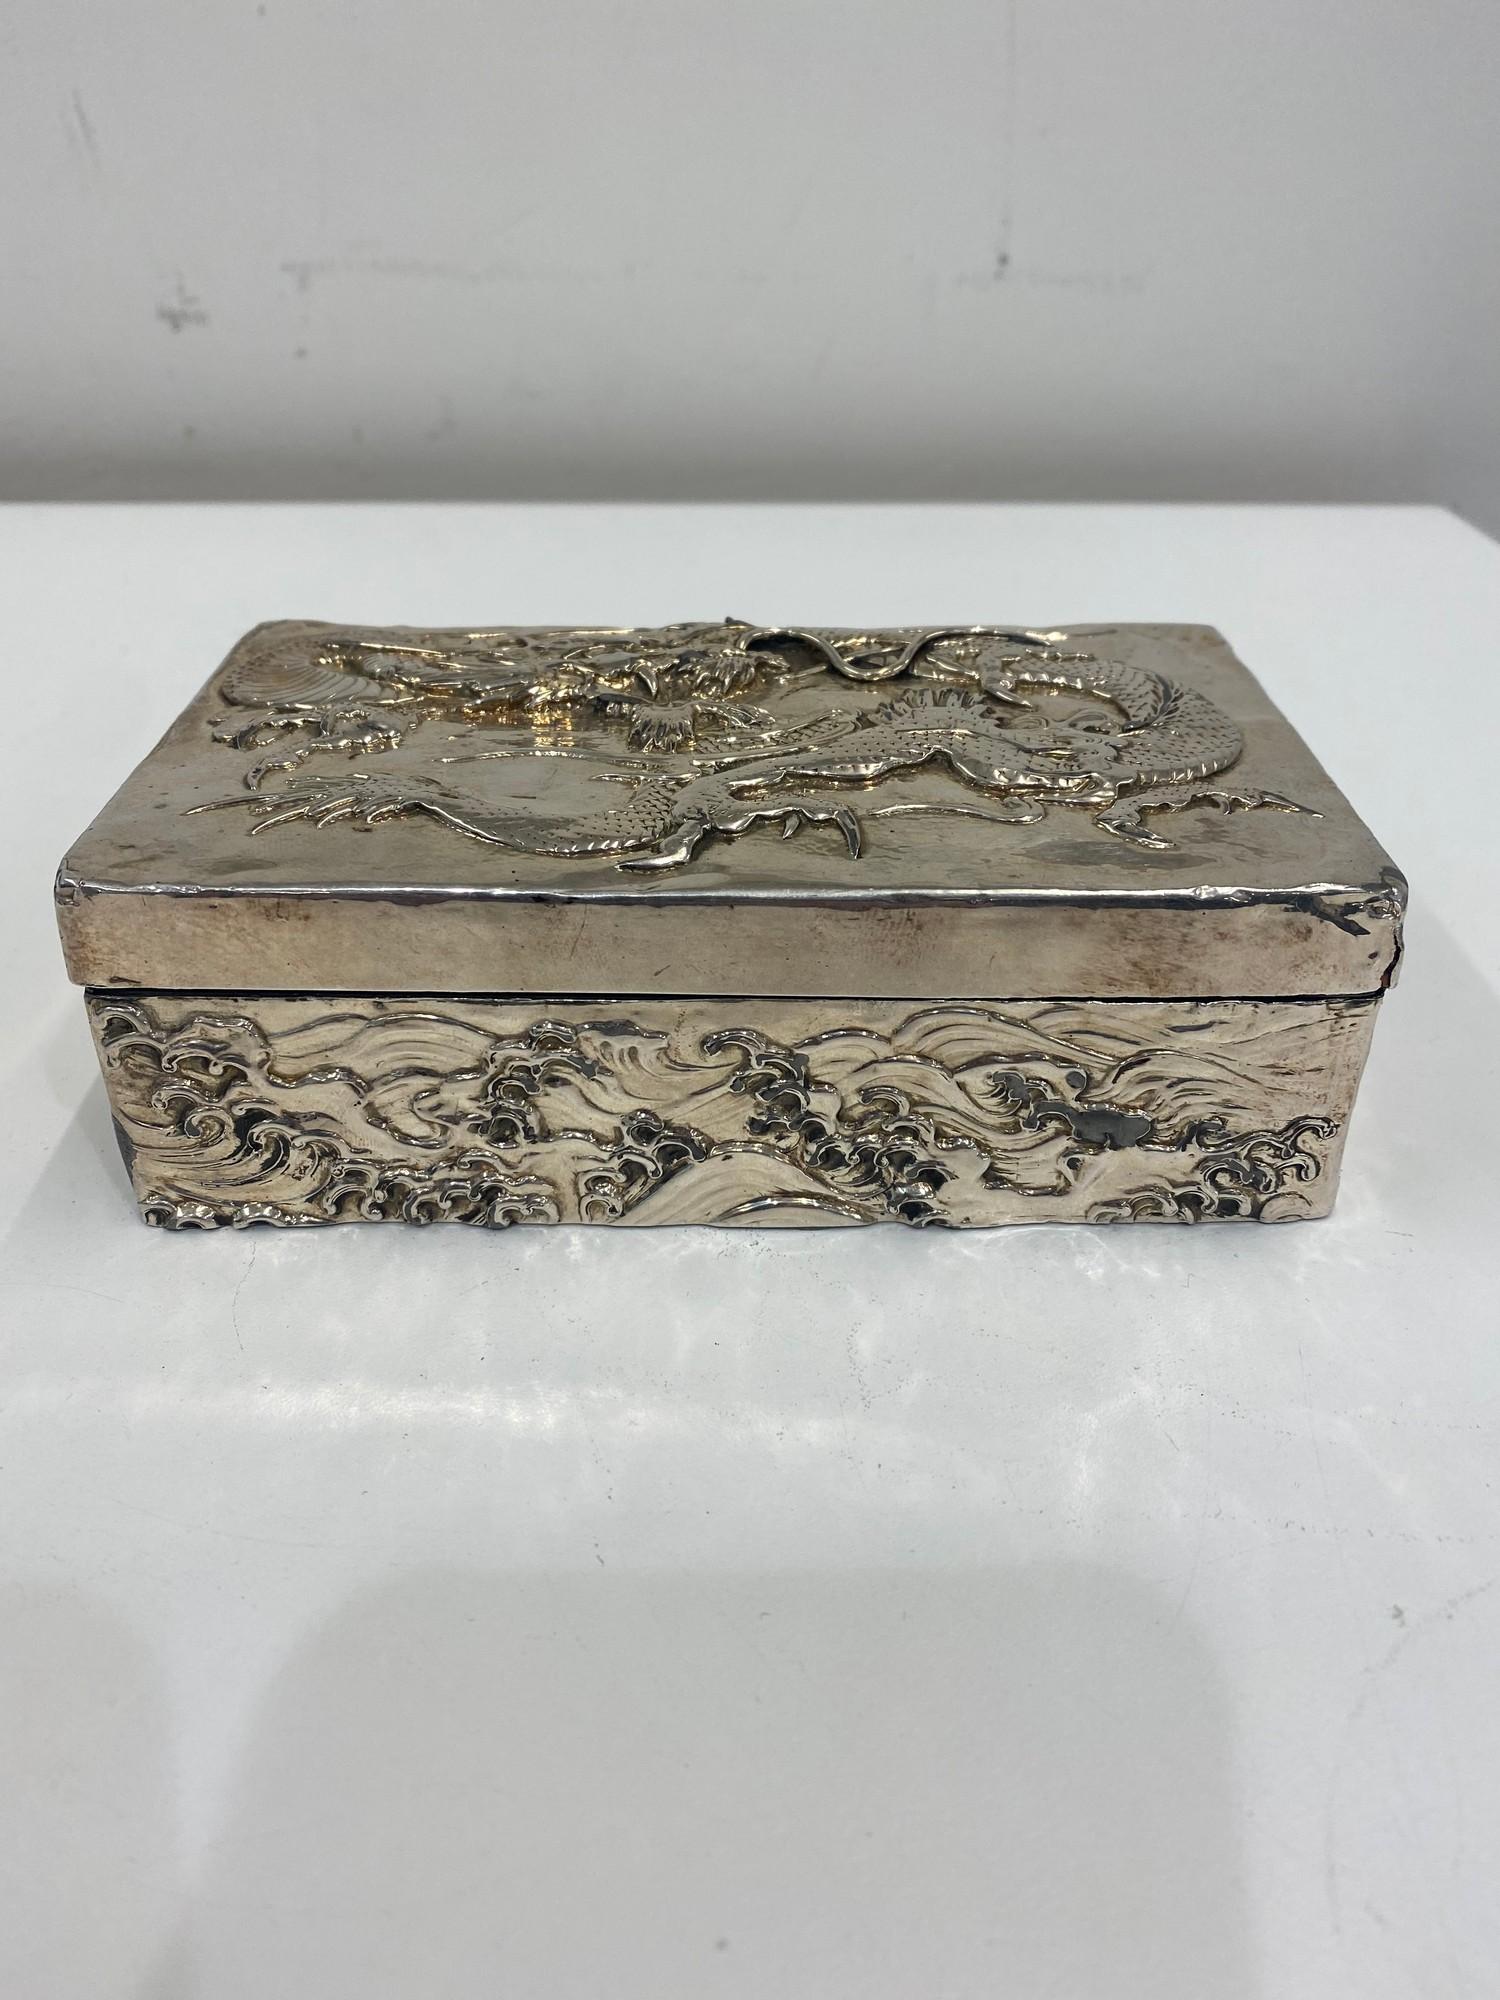 Silver and wooden cigarette box, Chinese detail, no markings but tested as silver, age related wear,